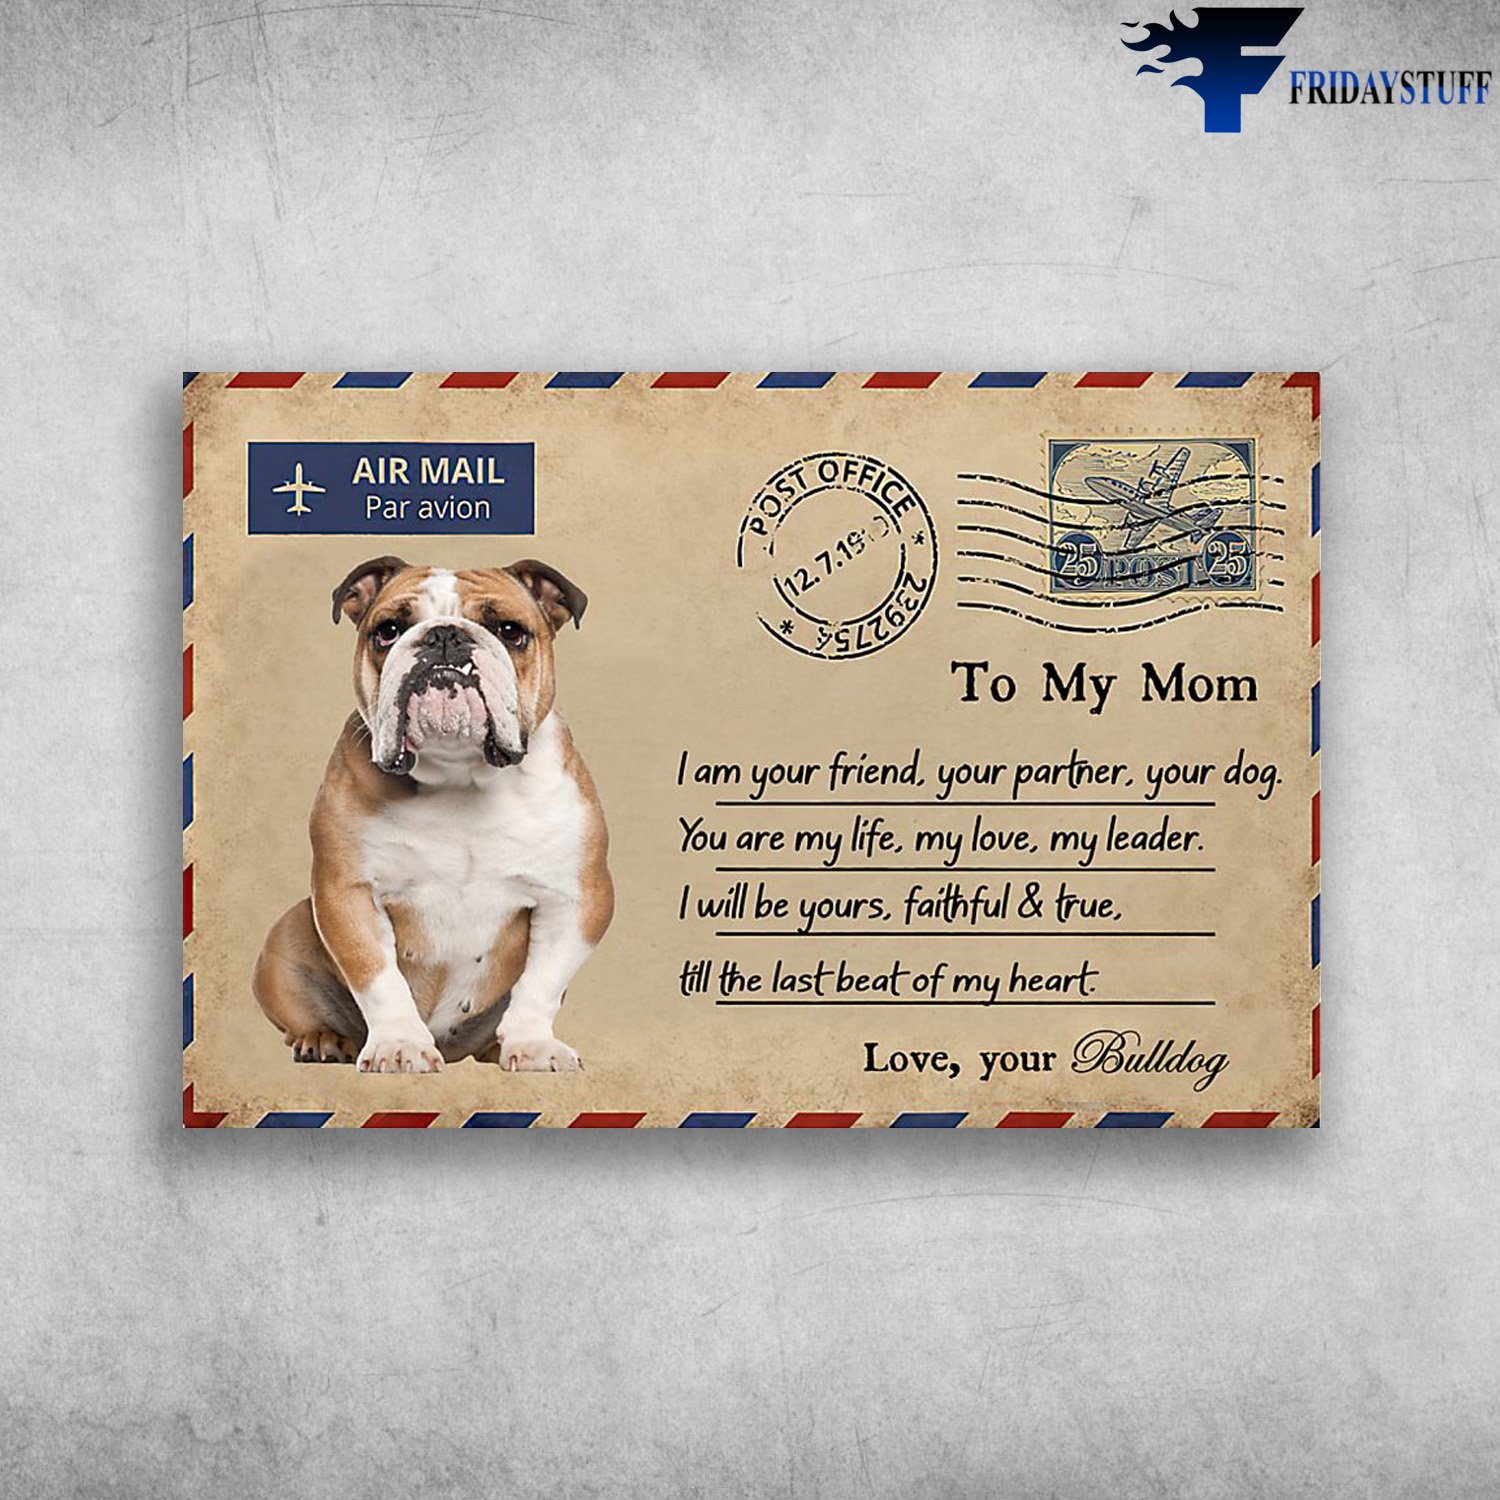 Bulldog - Air Mail PAr Avion, To My Mom, I Am Your Friend, Your Partner, Your Dog, You Are My Life, My Love, My Leader, I Will Be Yours, Faithful And True, Till The Last Beat Of My Heart, Love, Your Bulldog